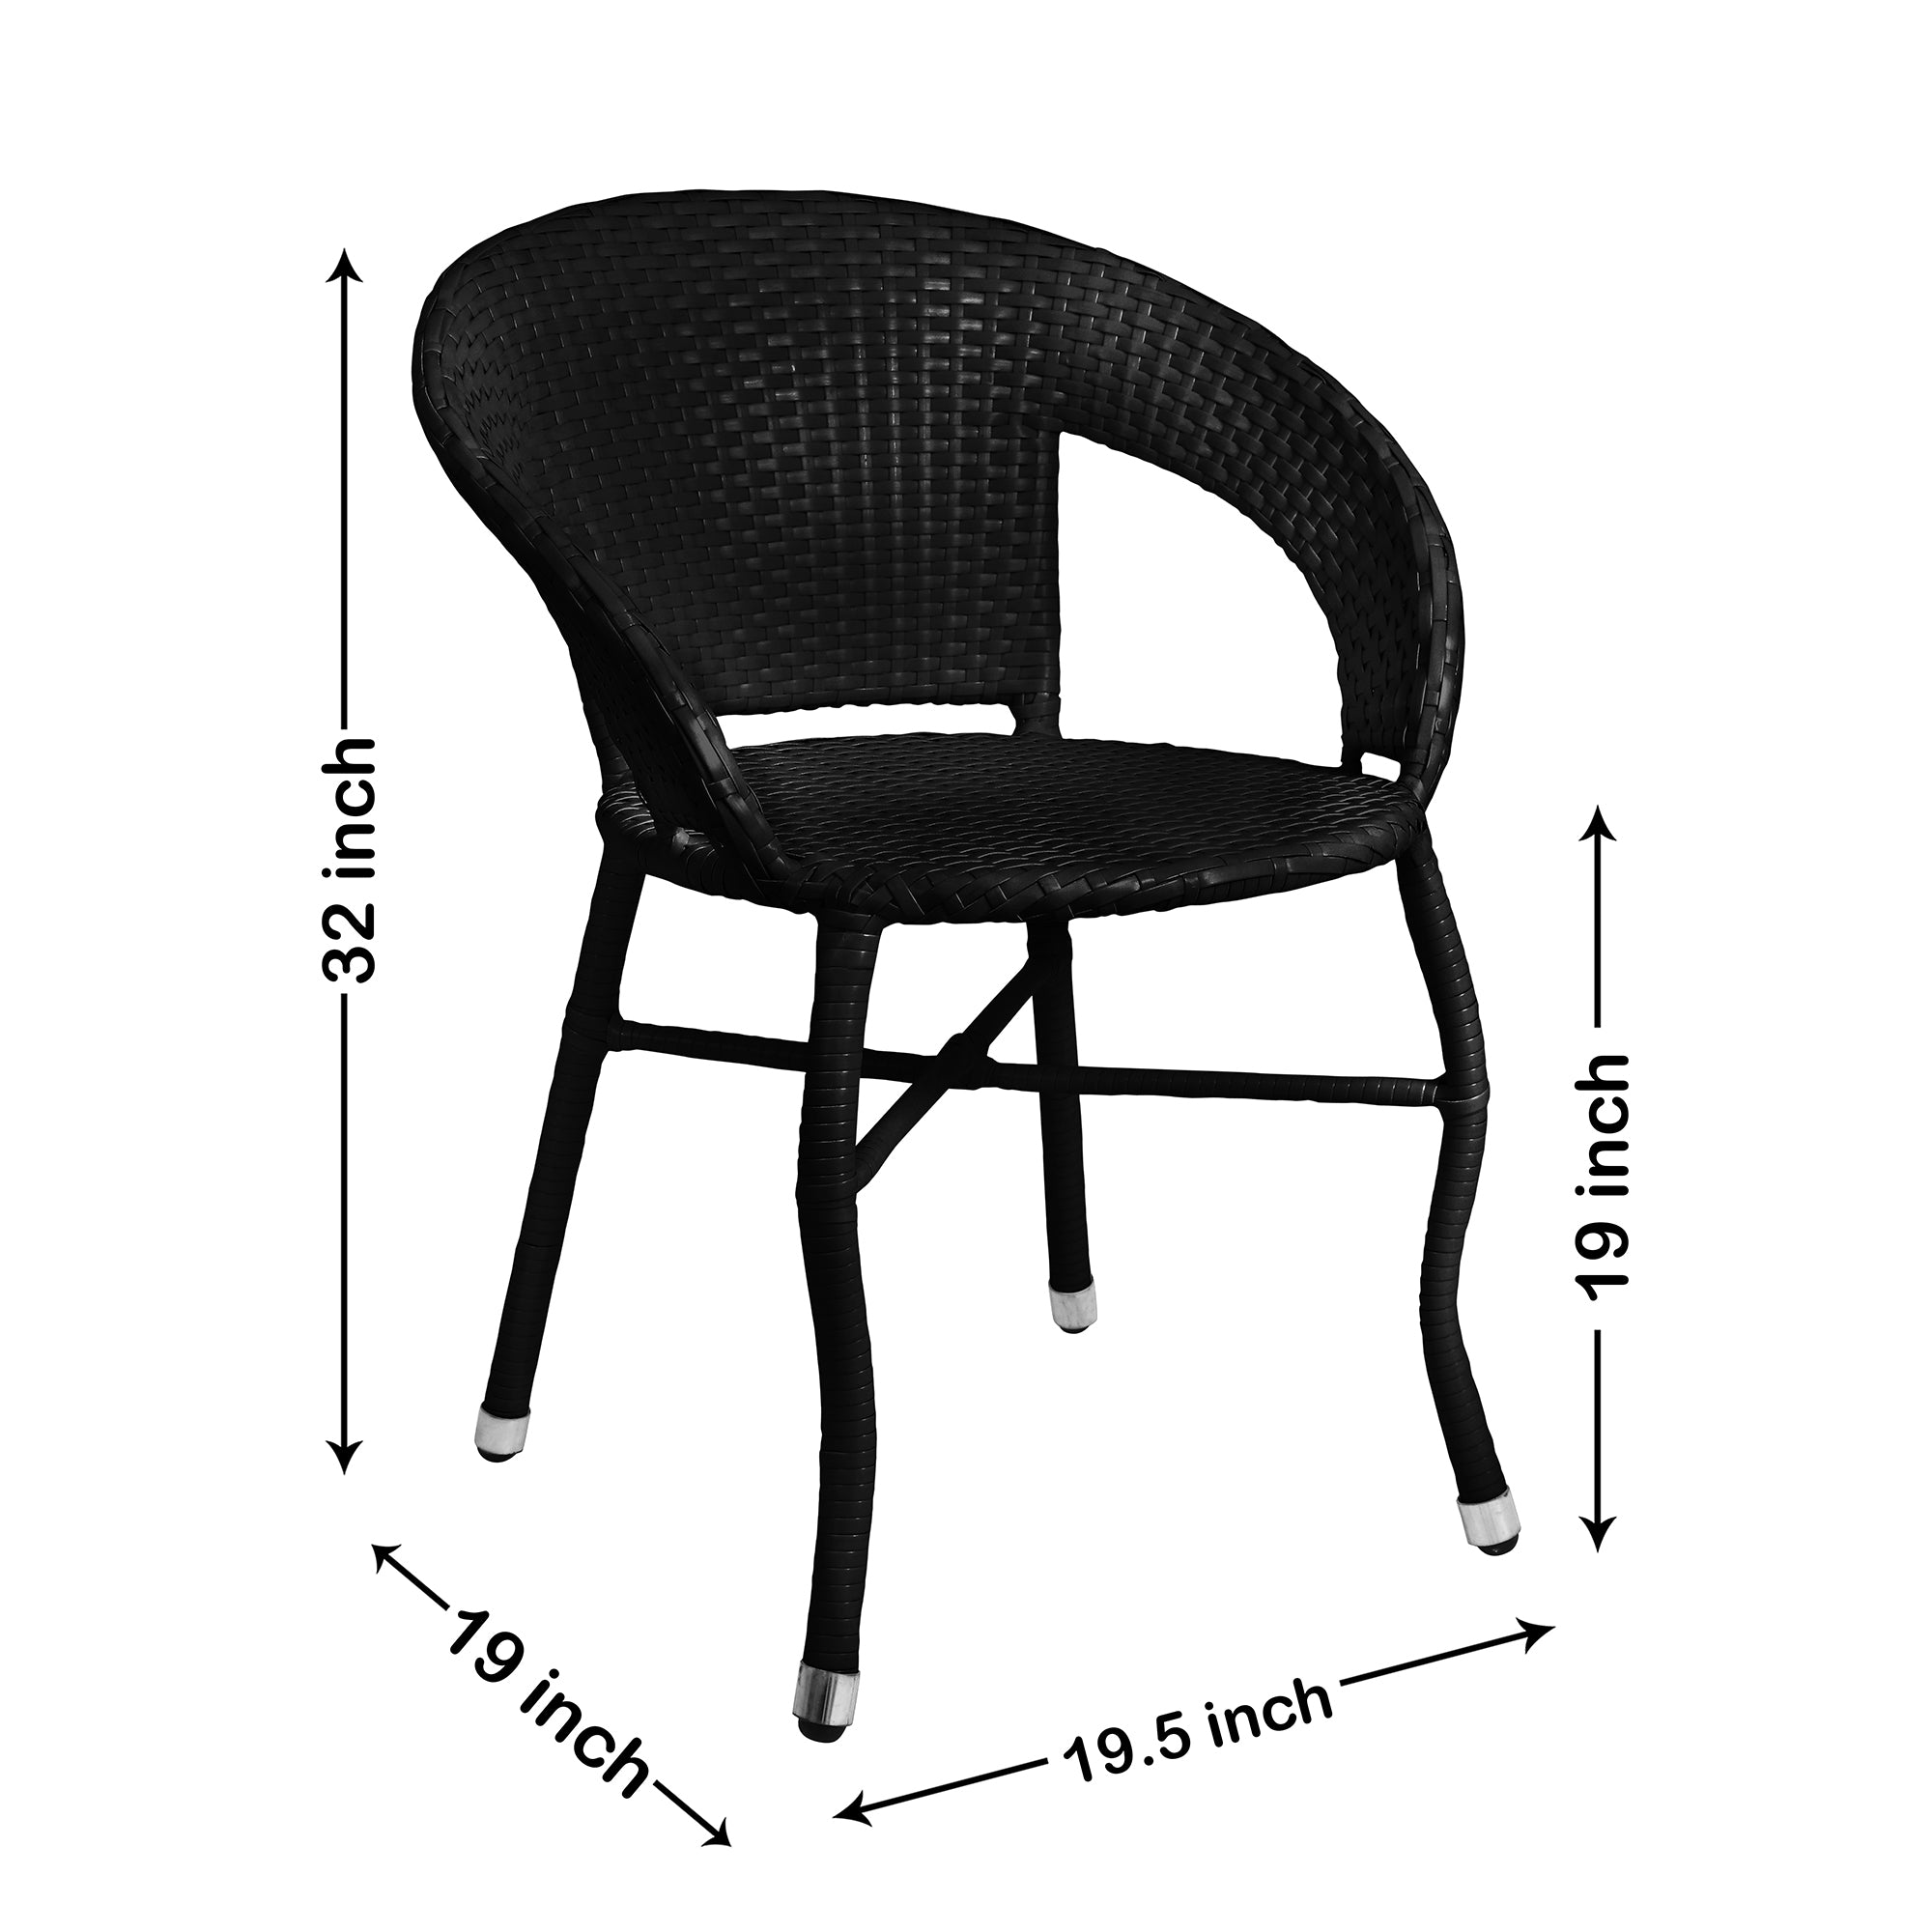 Grase Outdoor Patio Seating Set 4 Chairs and 1 Table Set (Black)